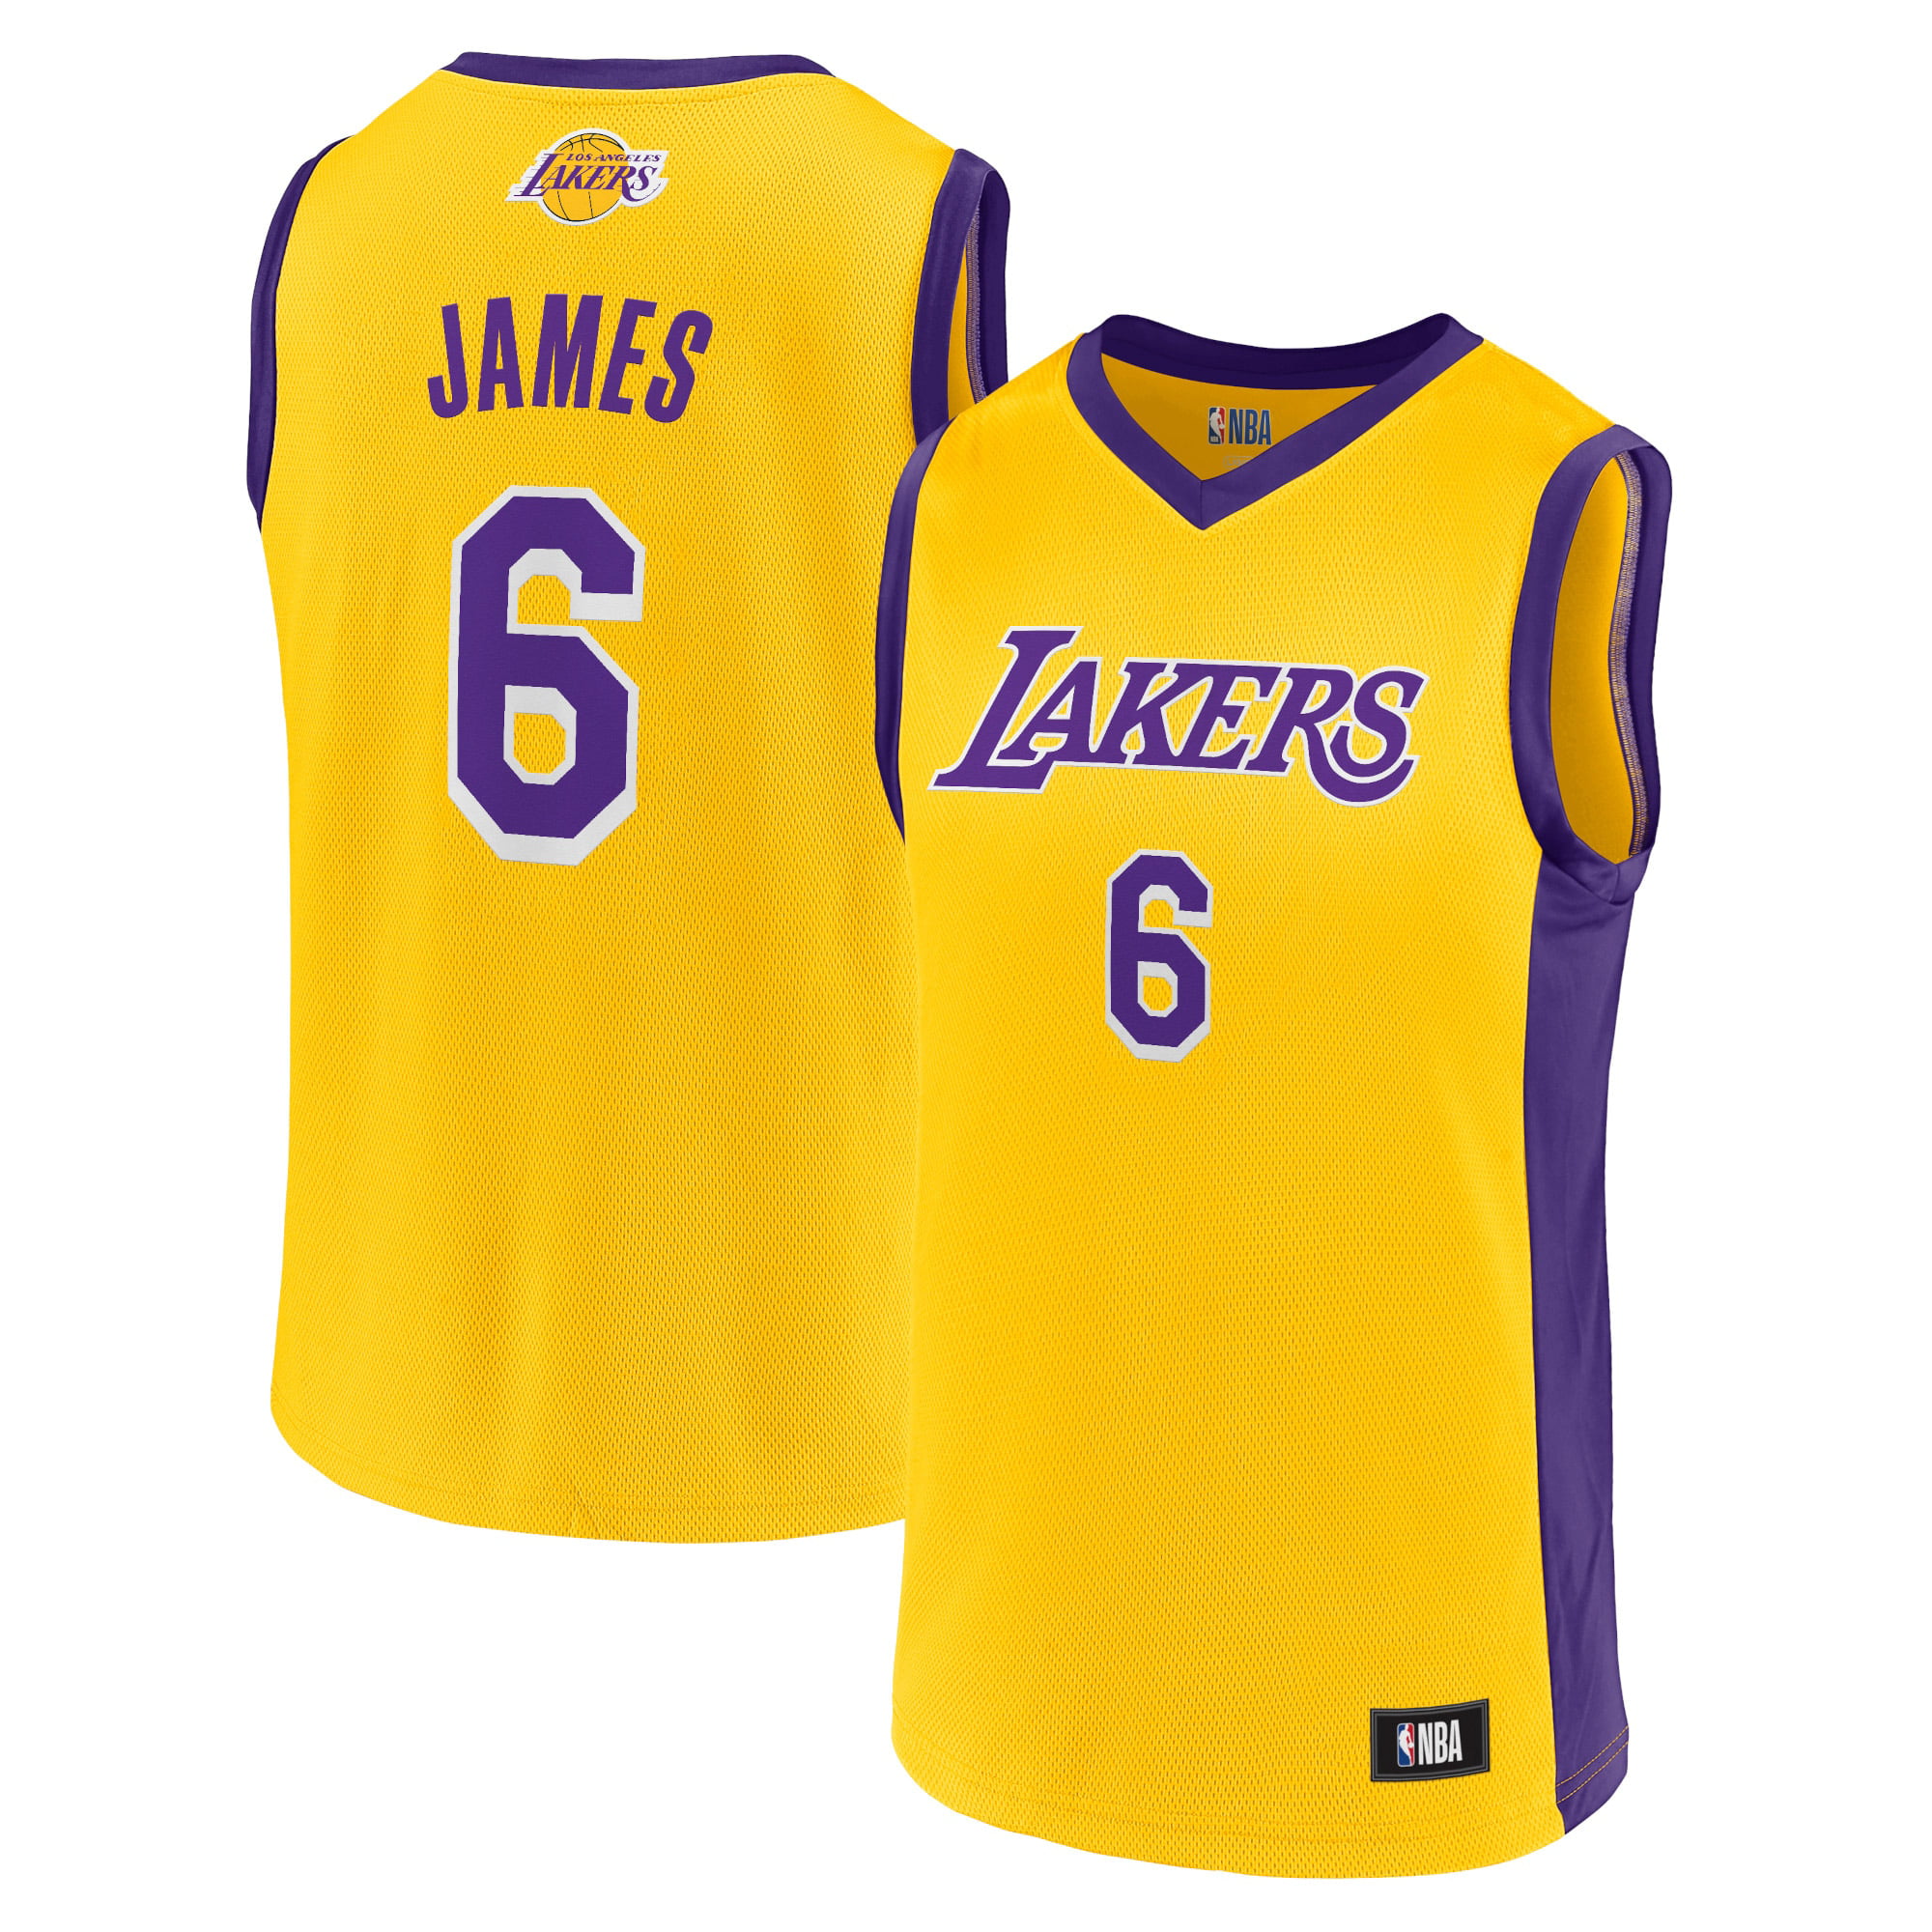 Officially Licensed NBA Personalized Auto Tag - Los Angeles Lakers